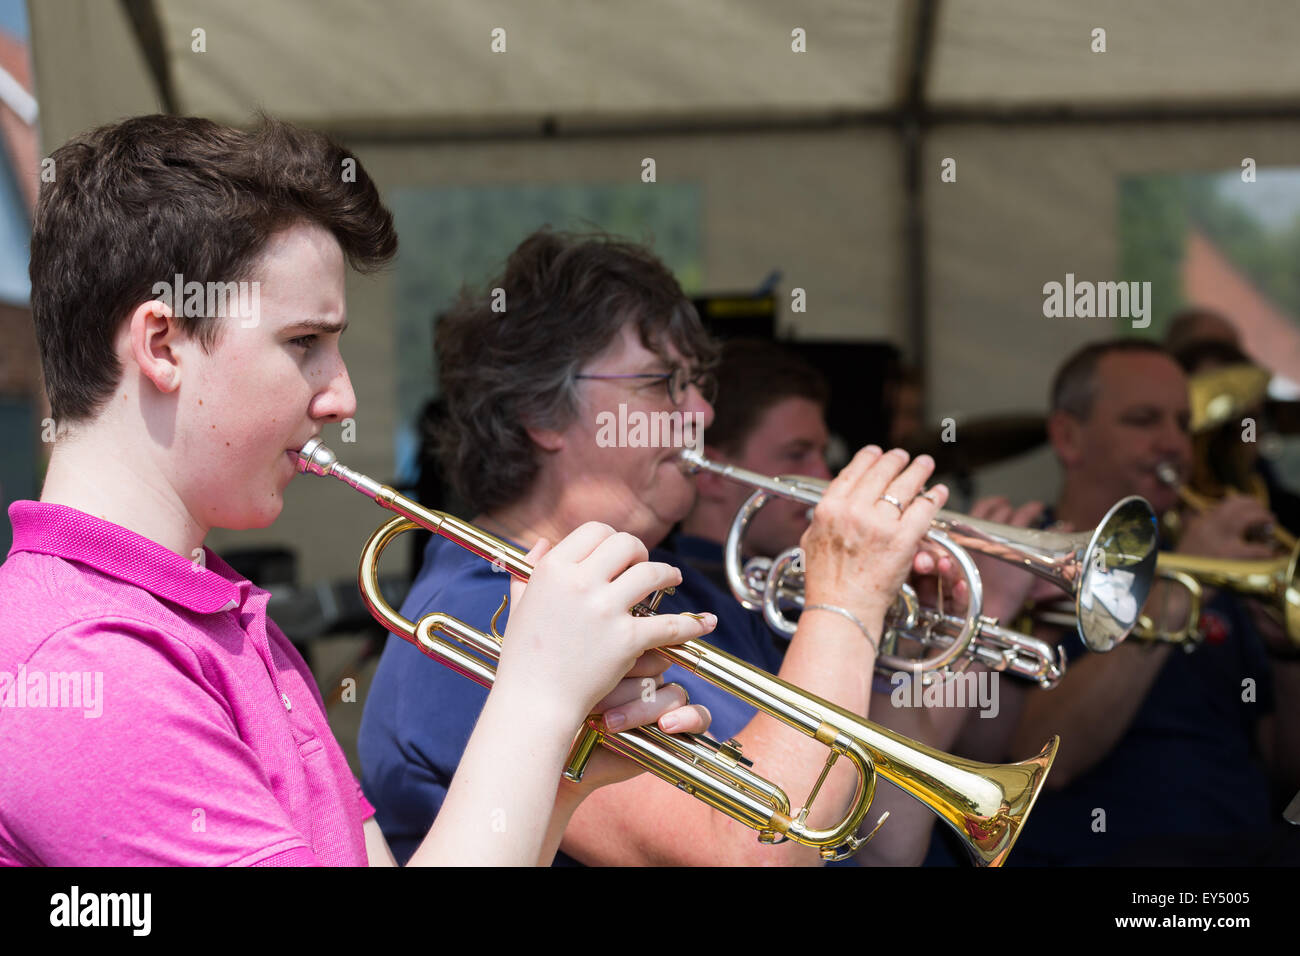 Trumpeters playing their instruments in a brass music group / orchestra / band Stock Photo